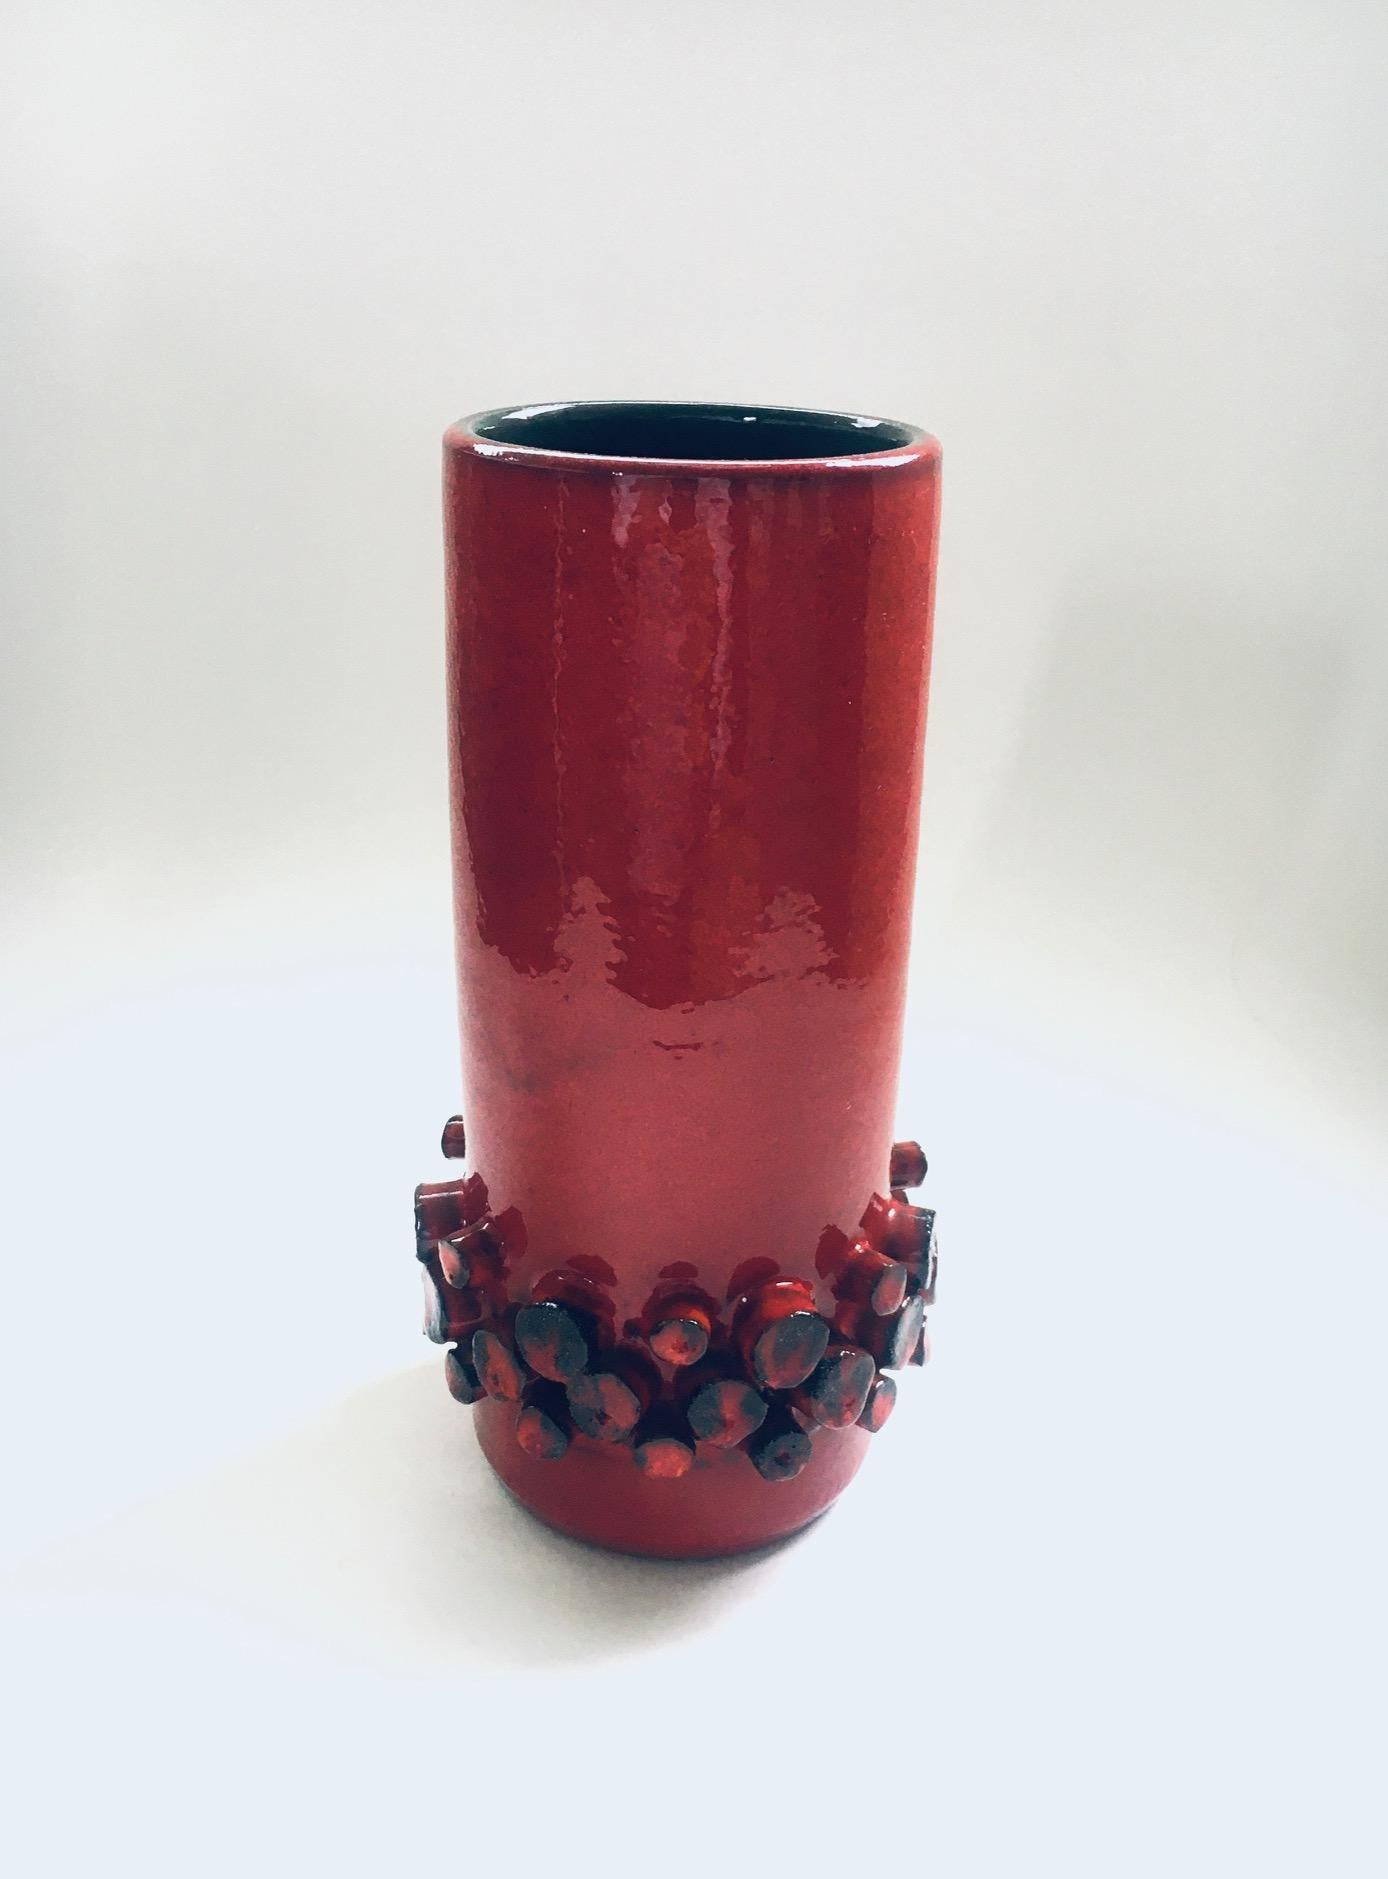 Mid-Century Modern Art Studio Pottery Vase by Hans Welling for Ceramano Ceralux, 1960's Germany